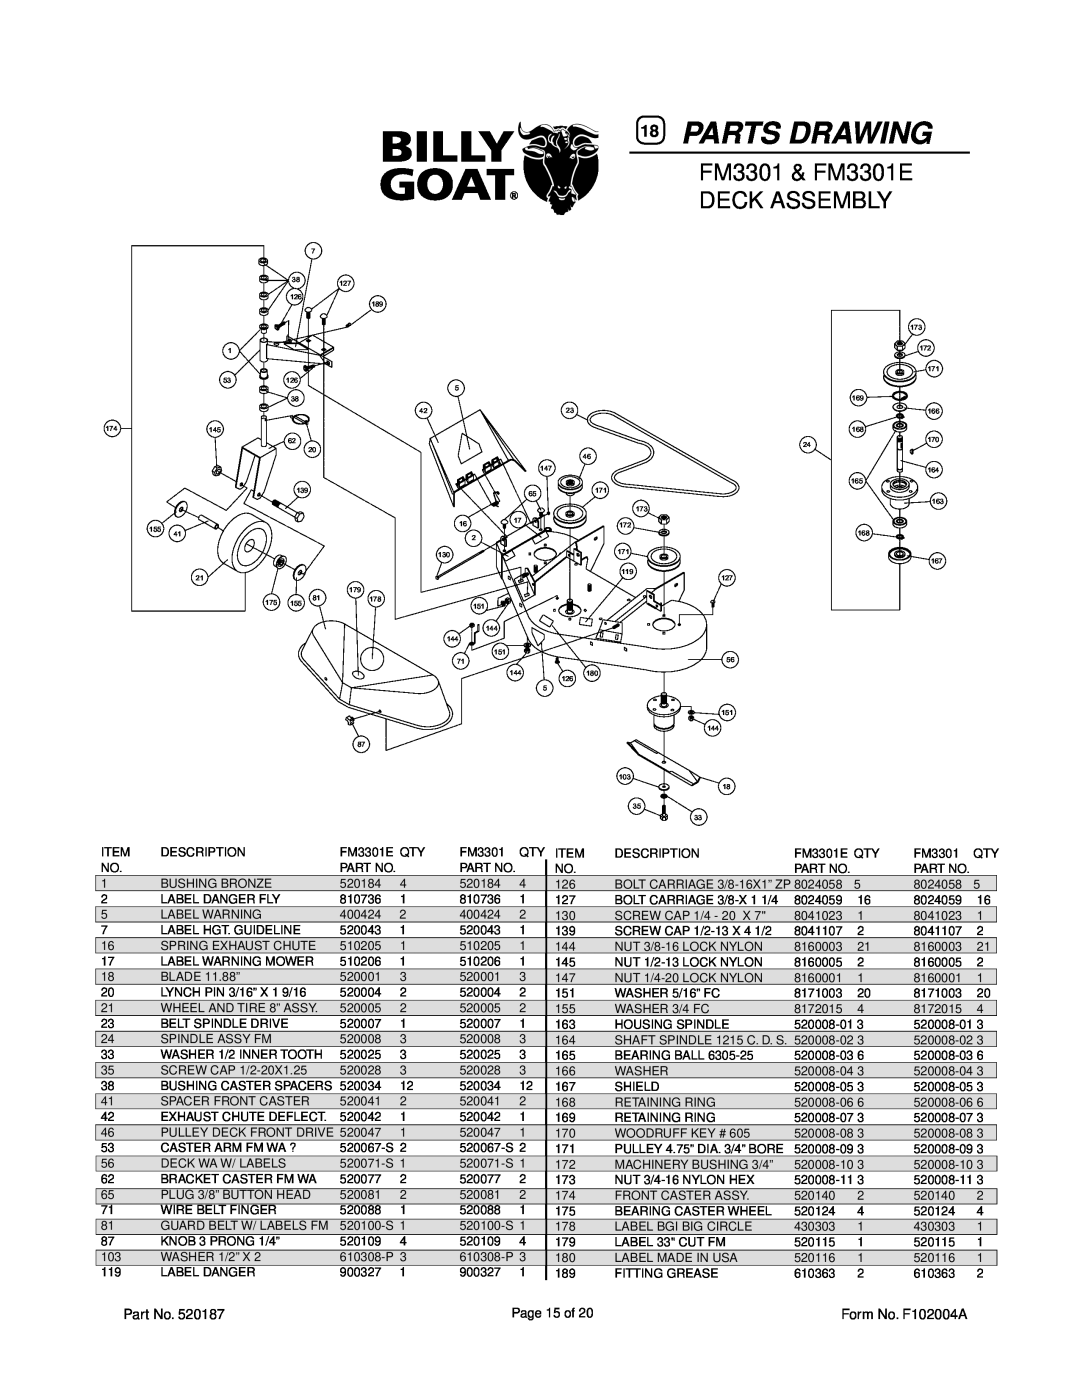 Billy Goat owner manual Parts Drawing, FM3301 & FM3301E DECK ASSEMBLY 